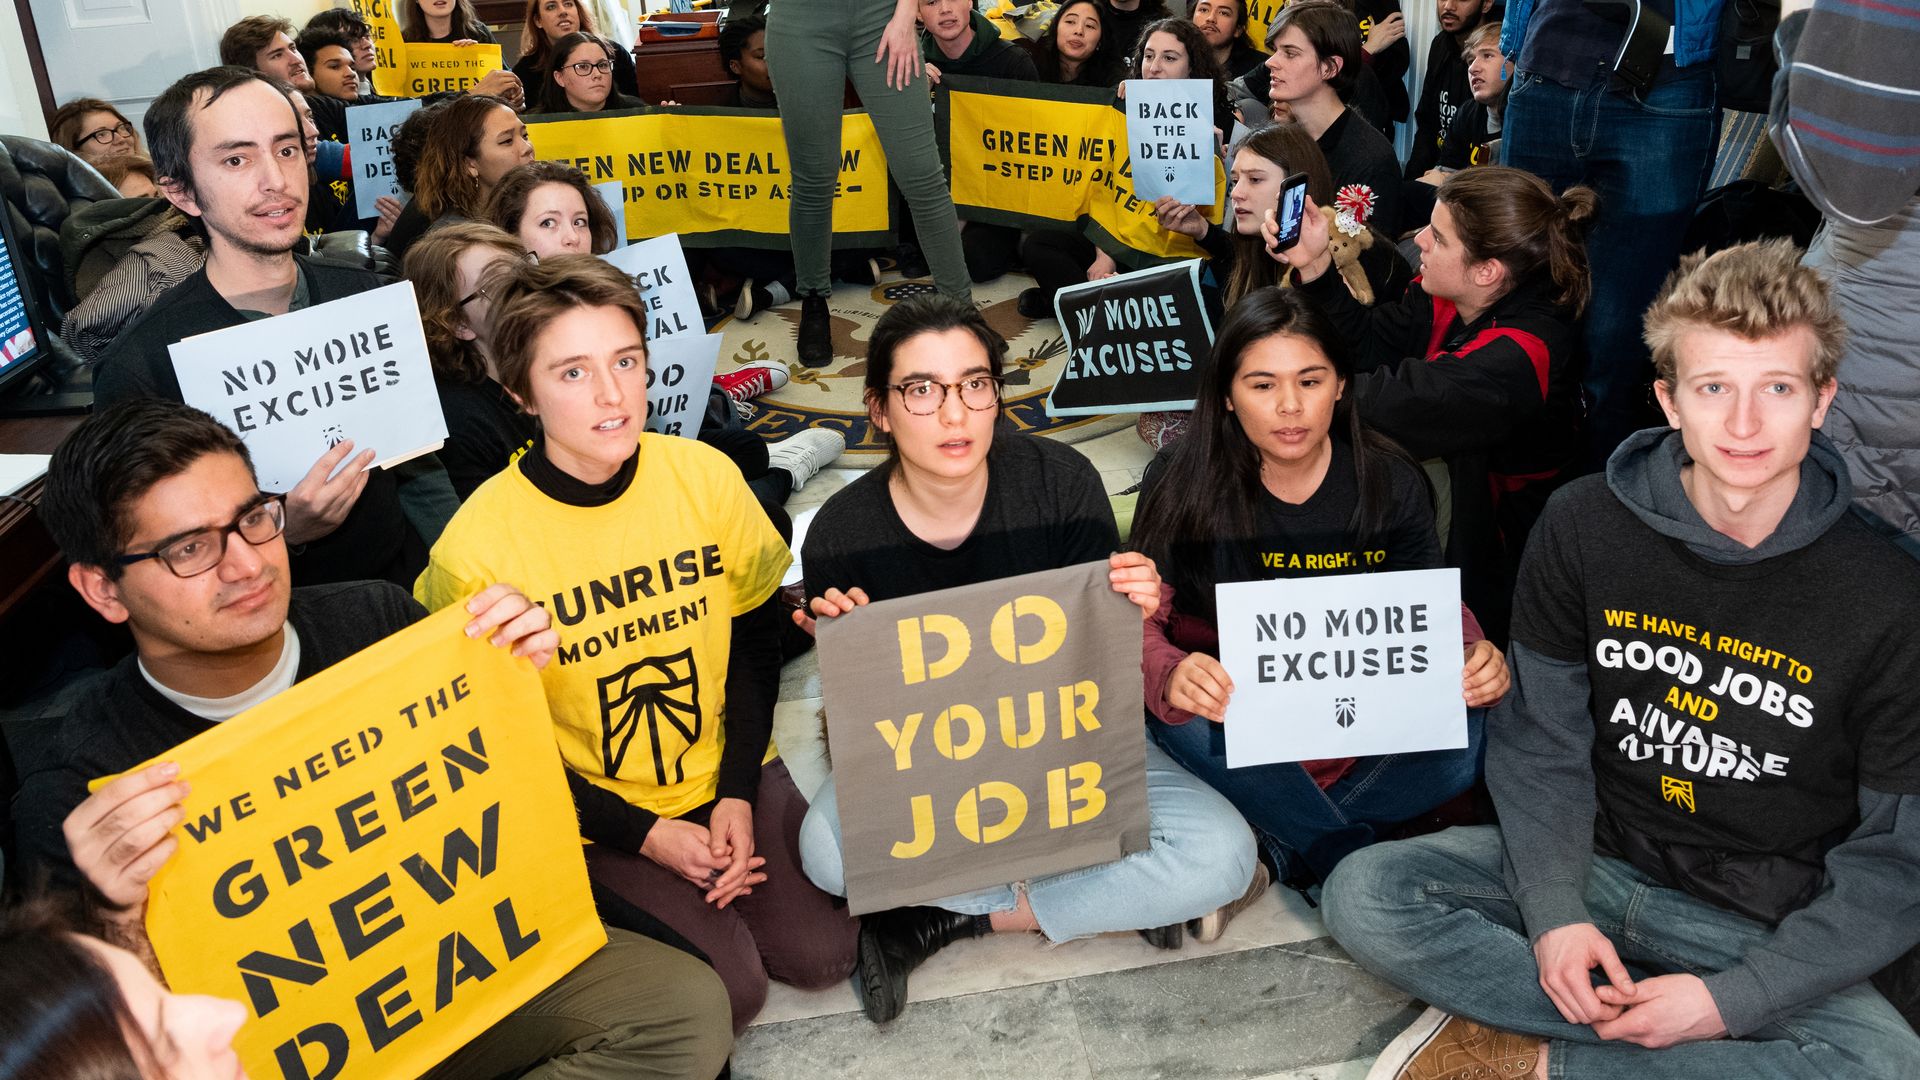 Youth activists sit with signs that read "green new deal" and "do your job"